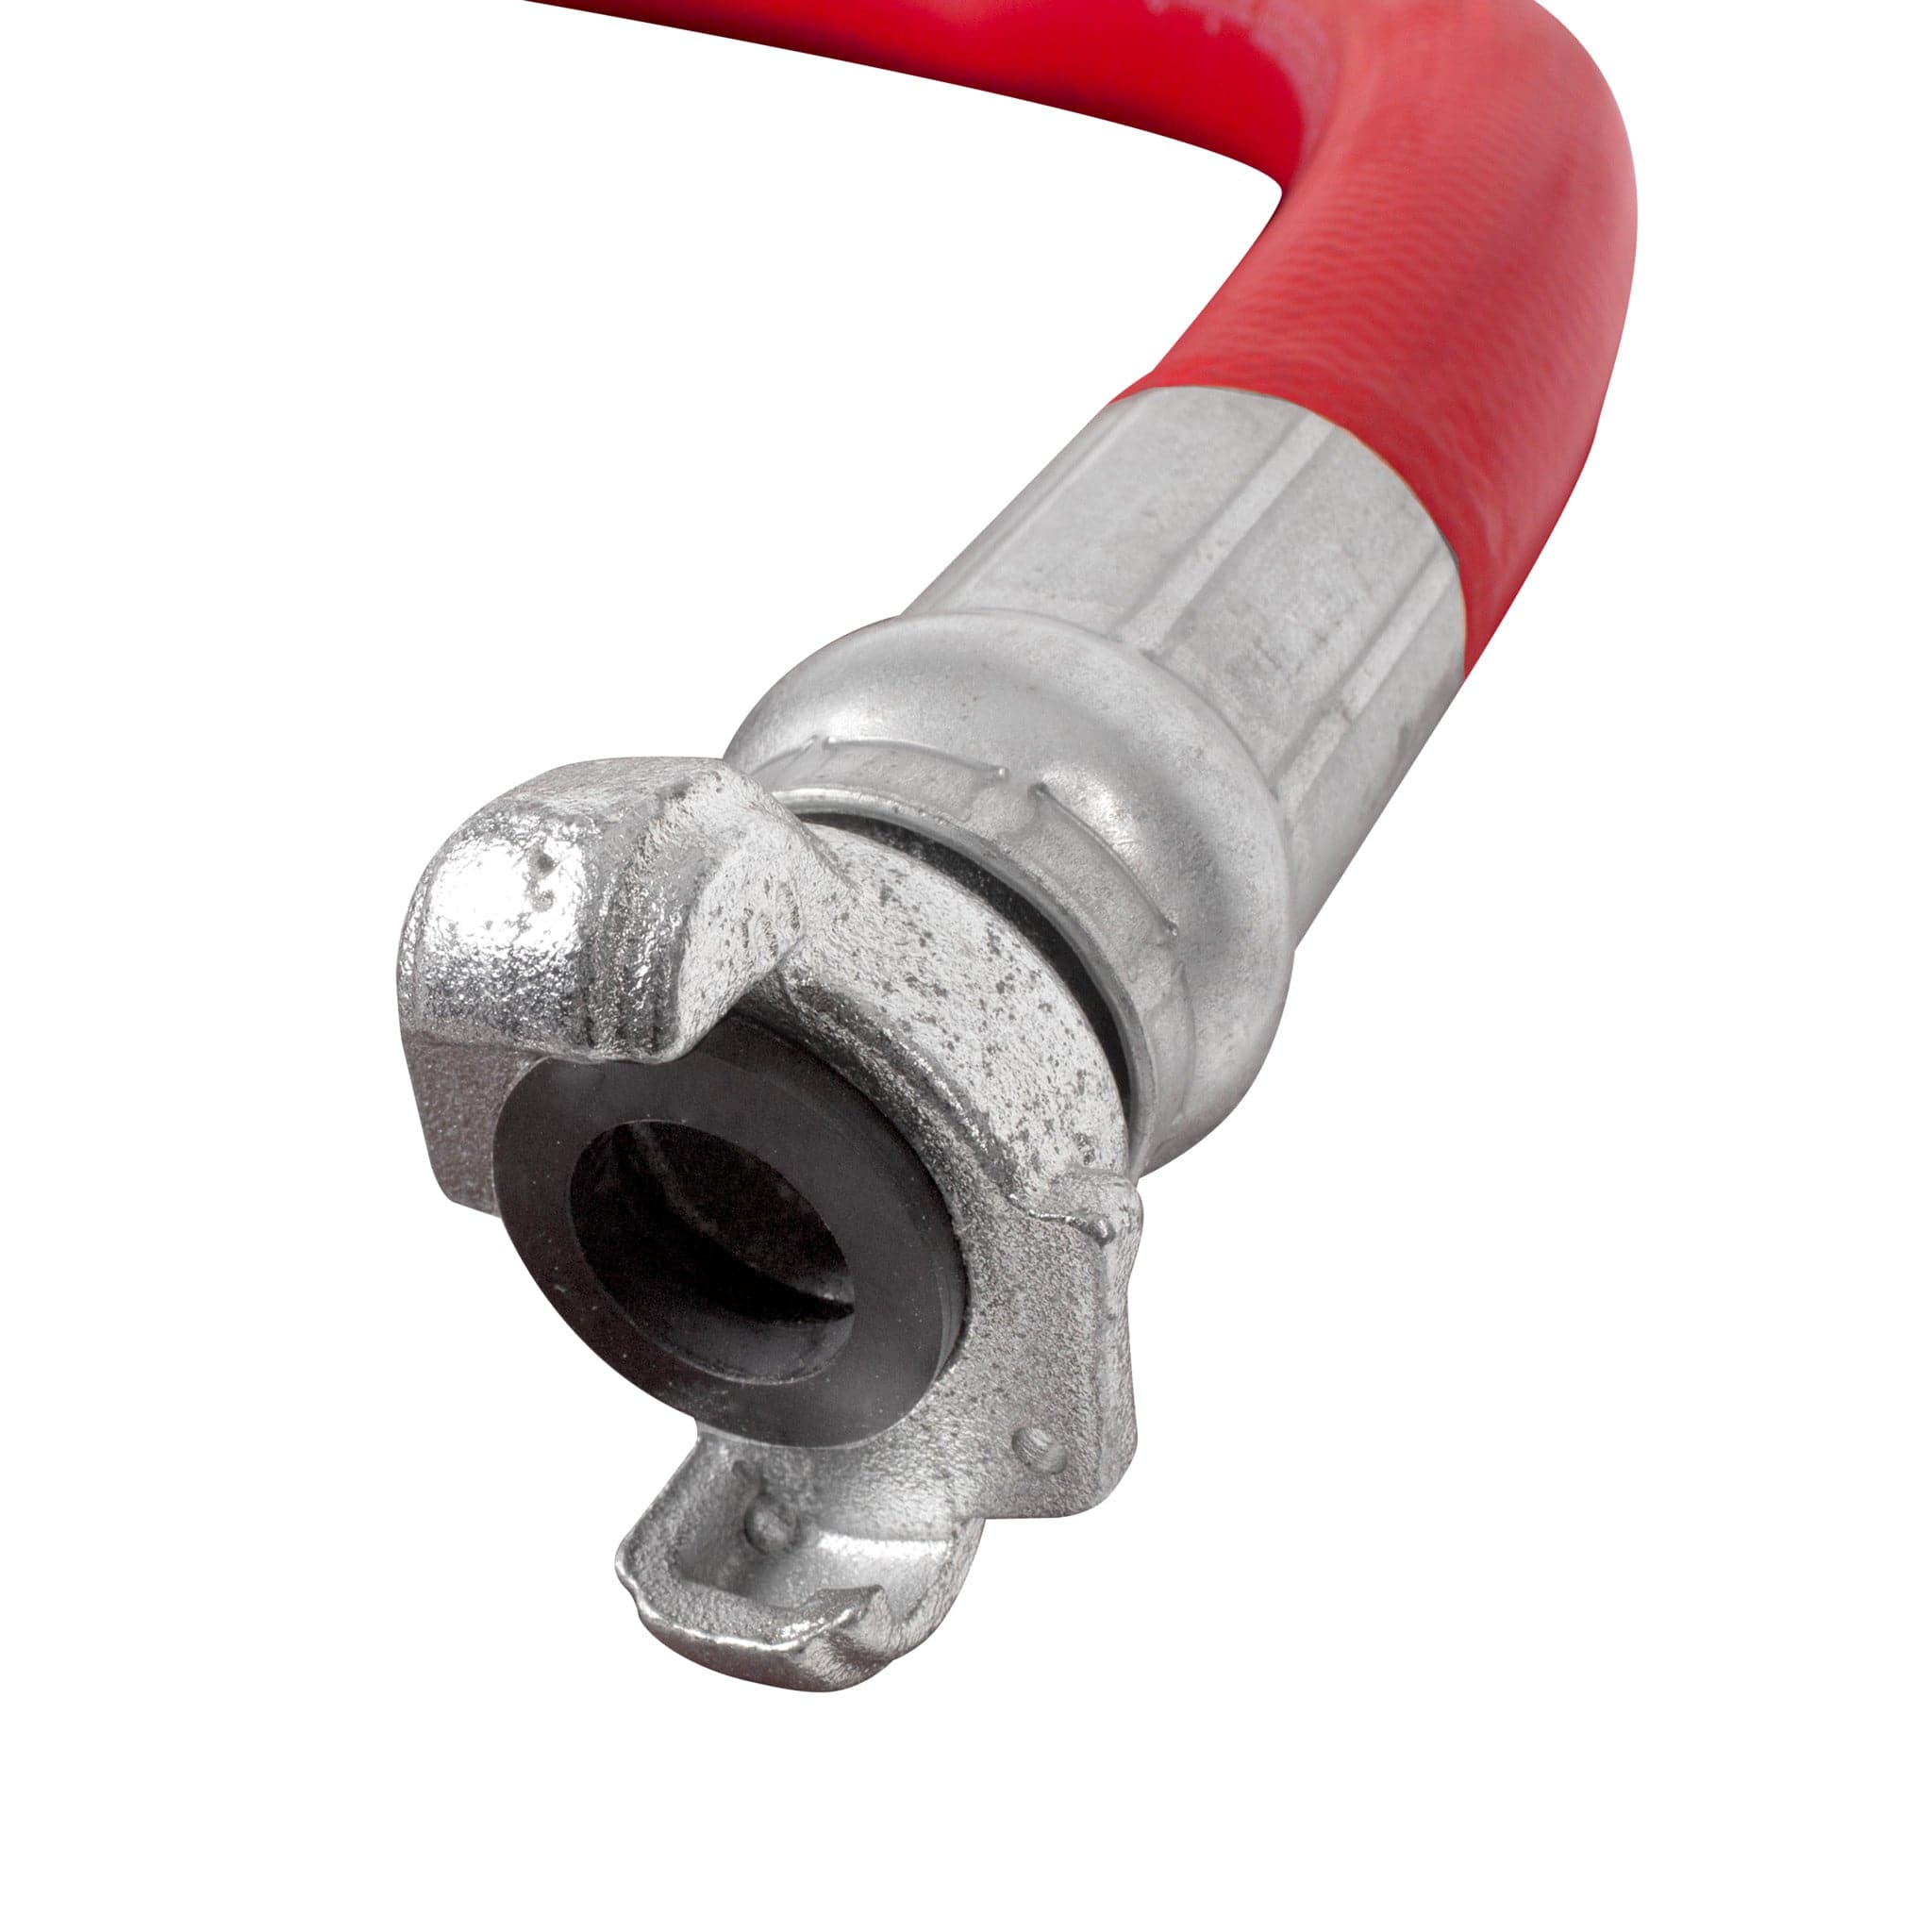 Standard Air Hose Assembly with Couplings - 1